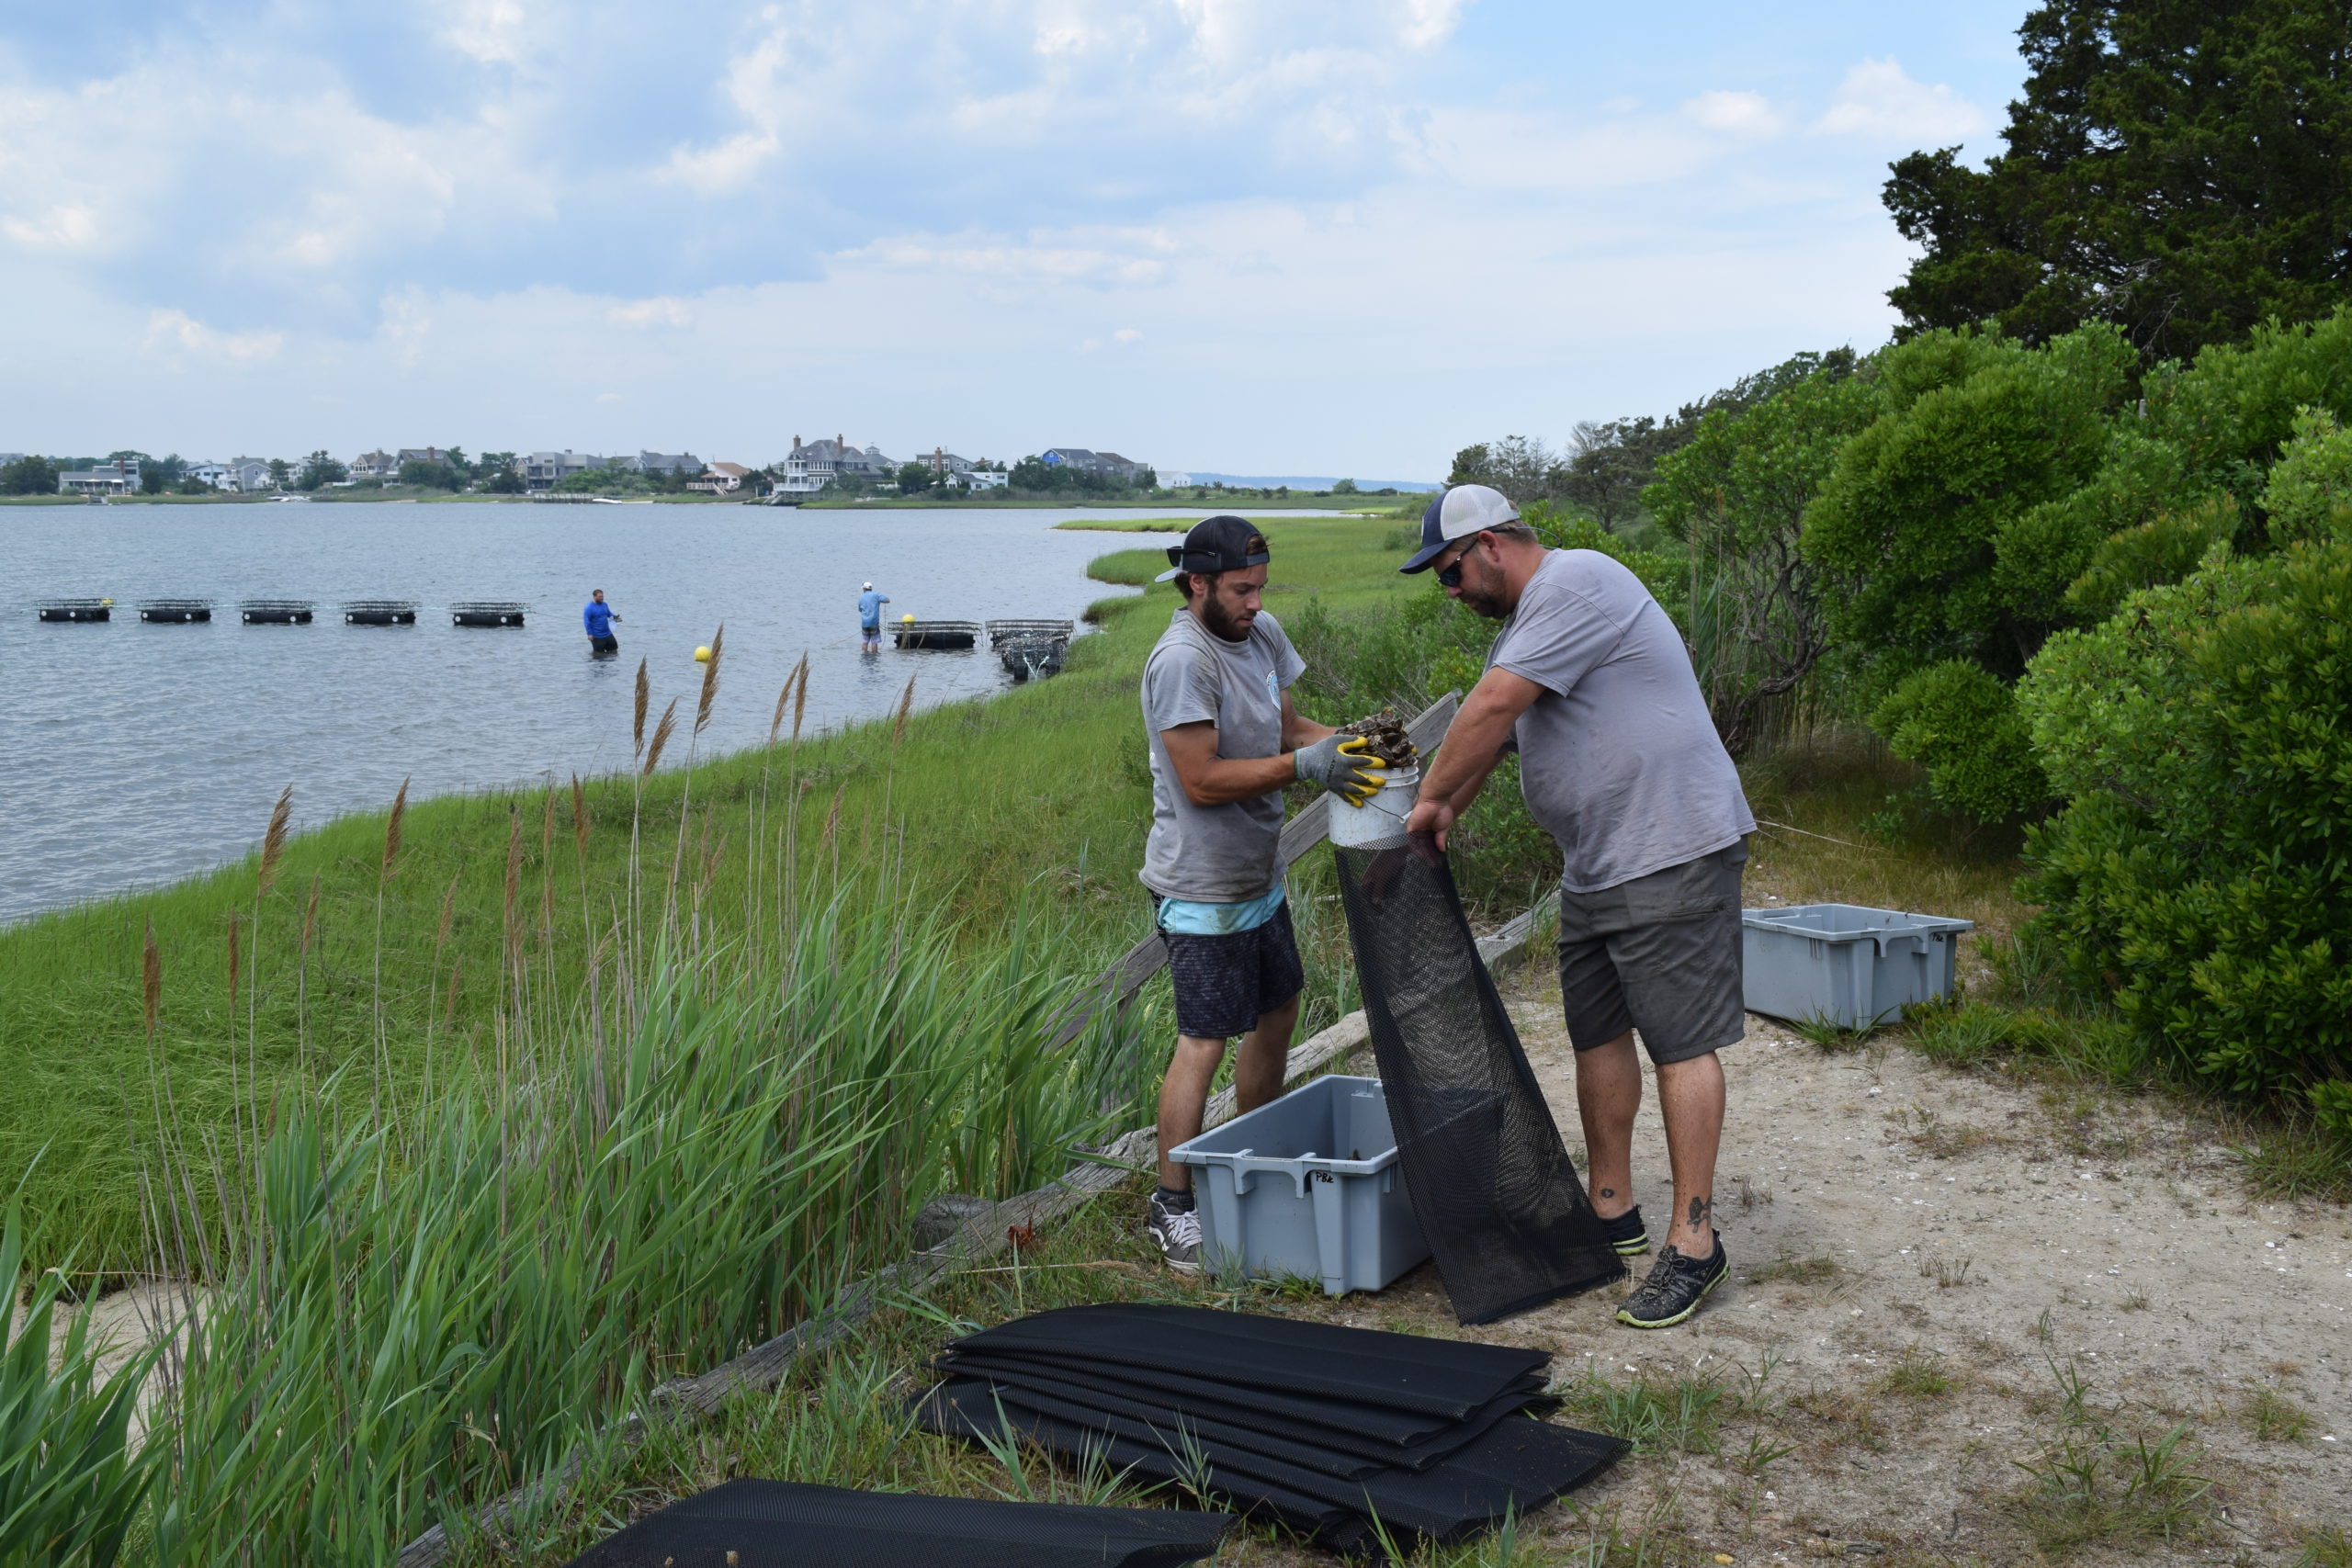 Members of the AWS staff adding oysters to the nursery